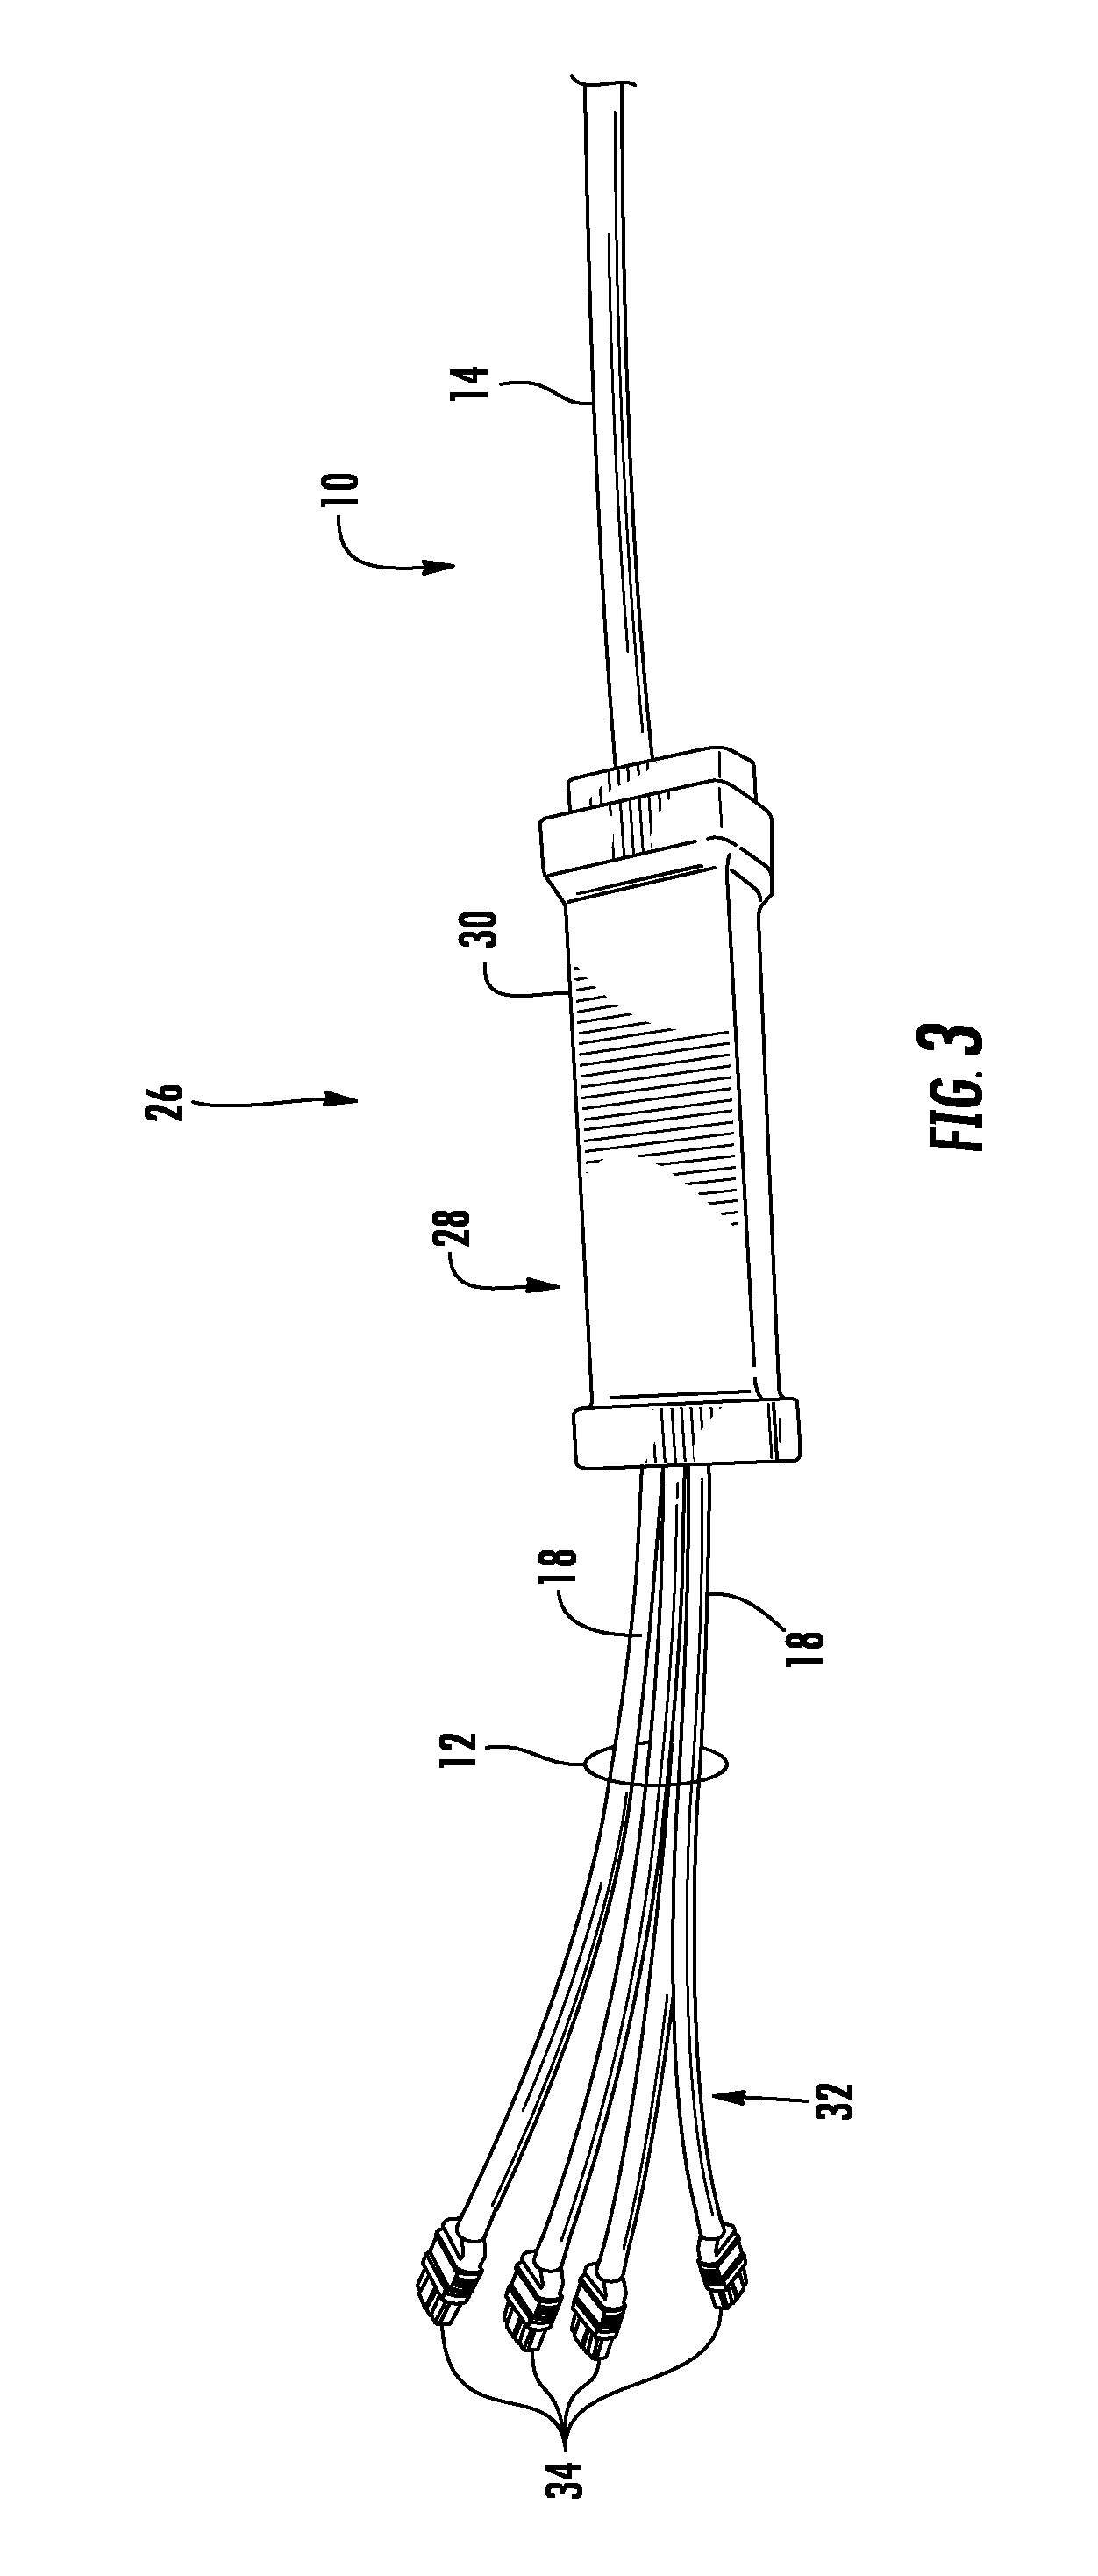 Multi- fiber, fiber optic cable assemblies providing constrained optical fibers within an optical fiber sub-unit, and related fiber optic components, cables,  and methods